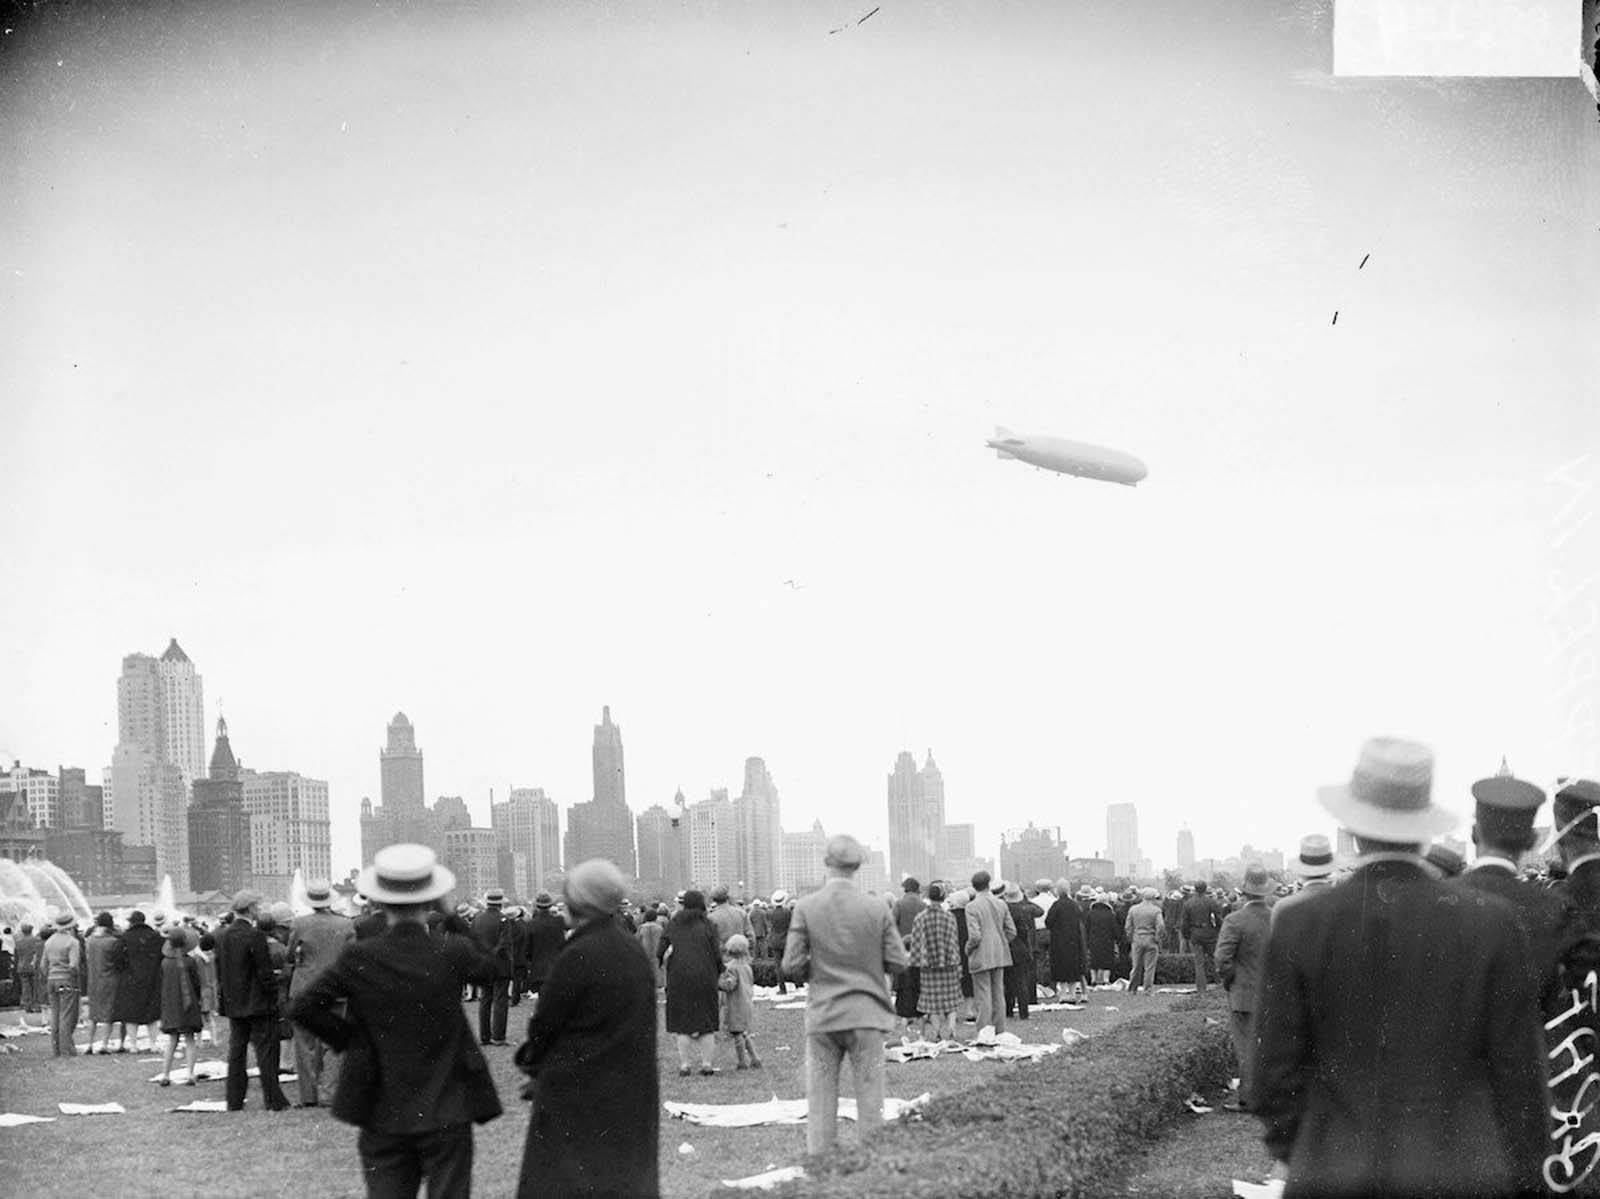 The Graf Zeppelin flying at a downward angle over Grant Park in The Loop community area of Chicago.